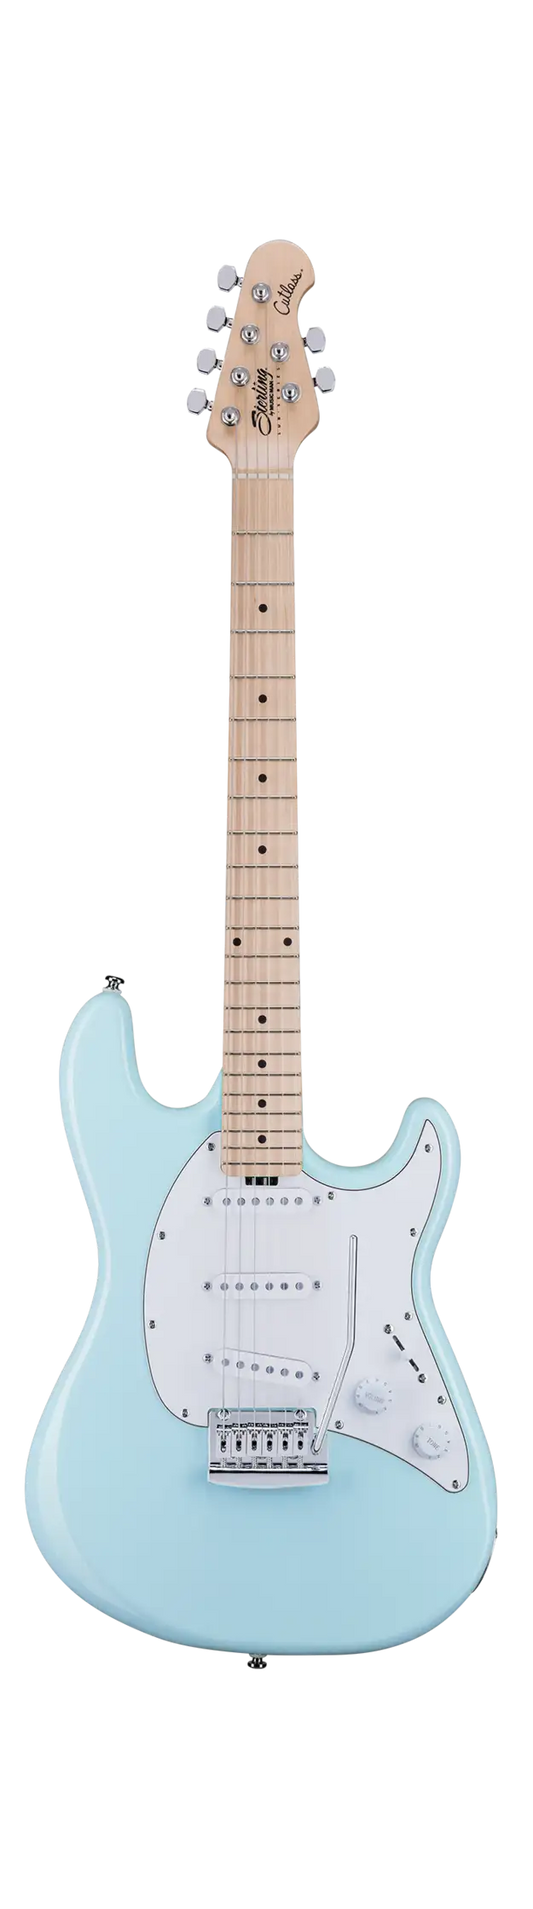 STERLING SUB CT30 CUTLASS - DAPHNE BLUE- SSS - MN - ELECTRIC GUITAR - STERLING BY MUSIC MAN